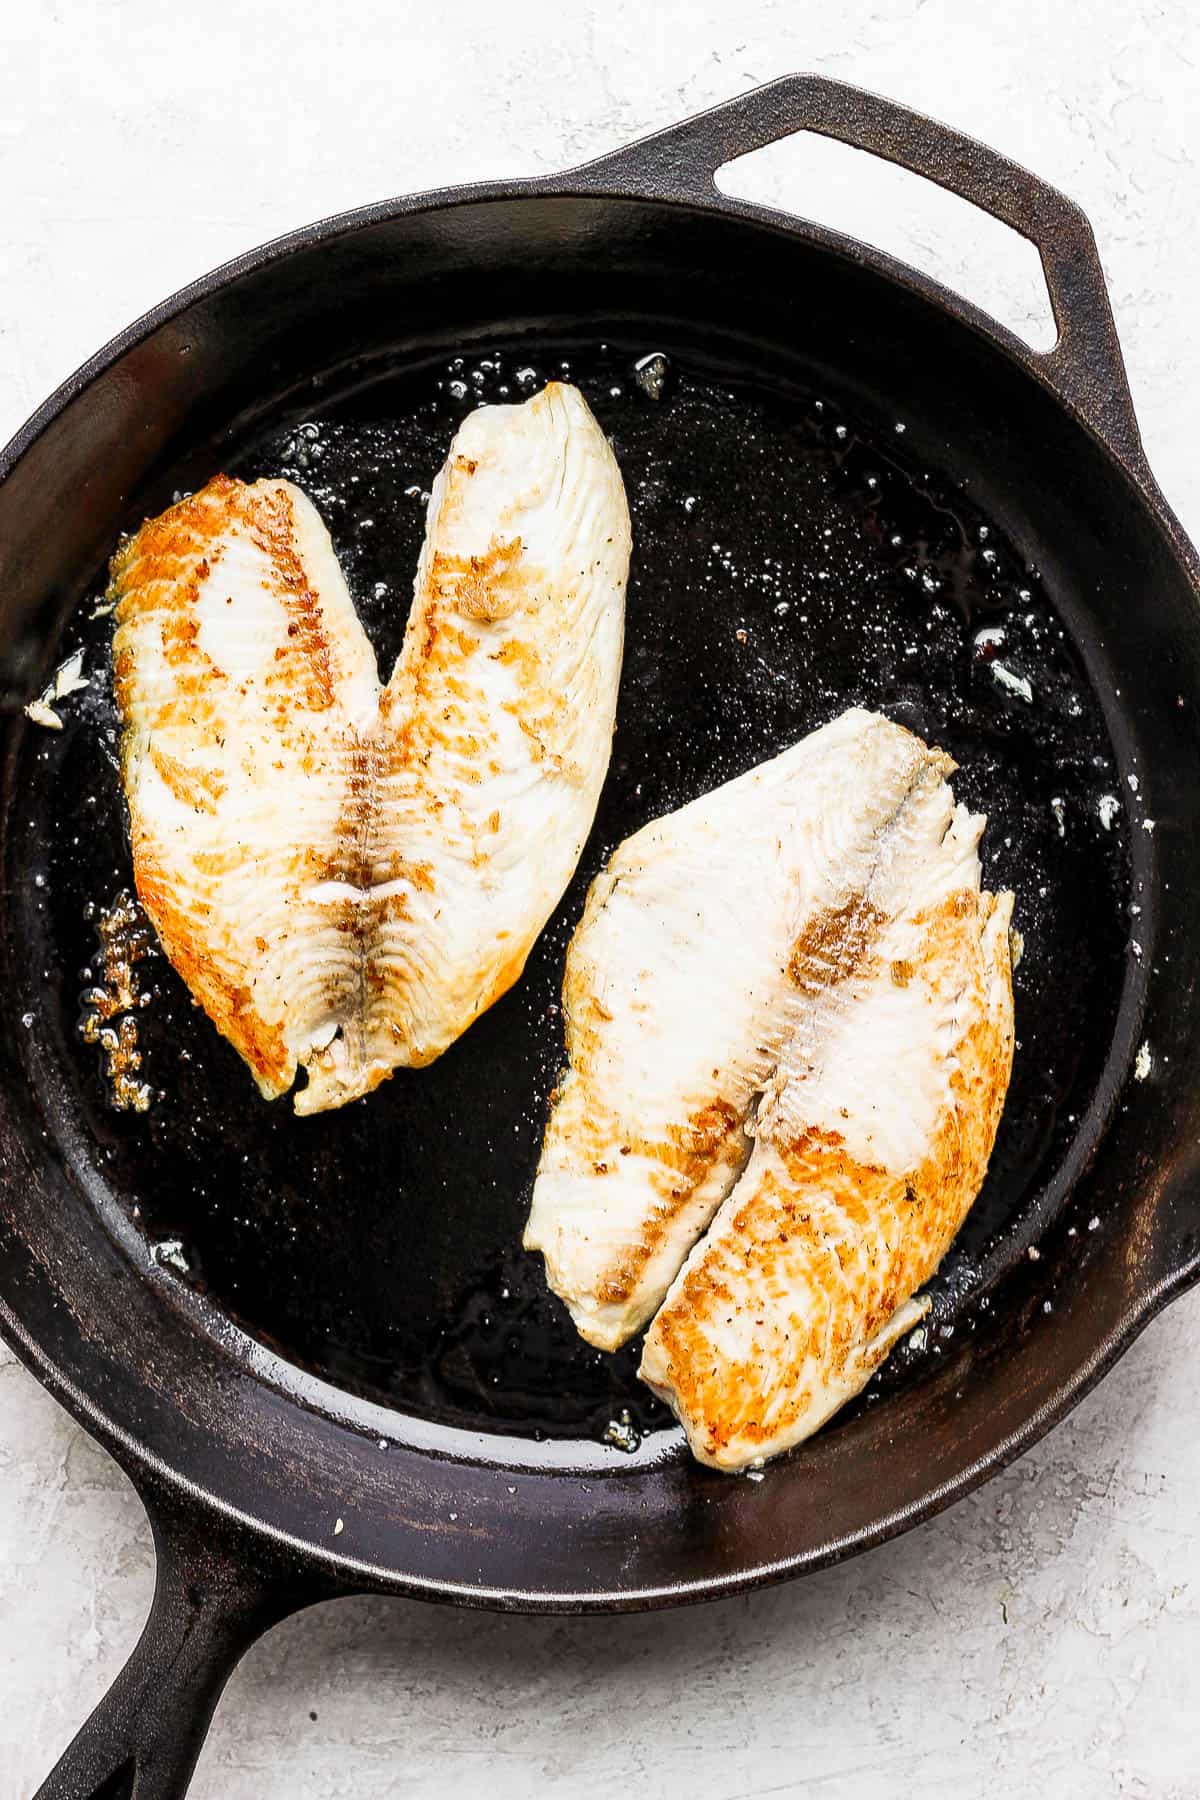 2 fish filets grilled in a cast iron skillet.